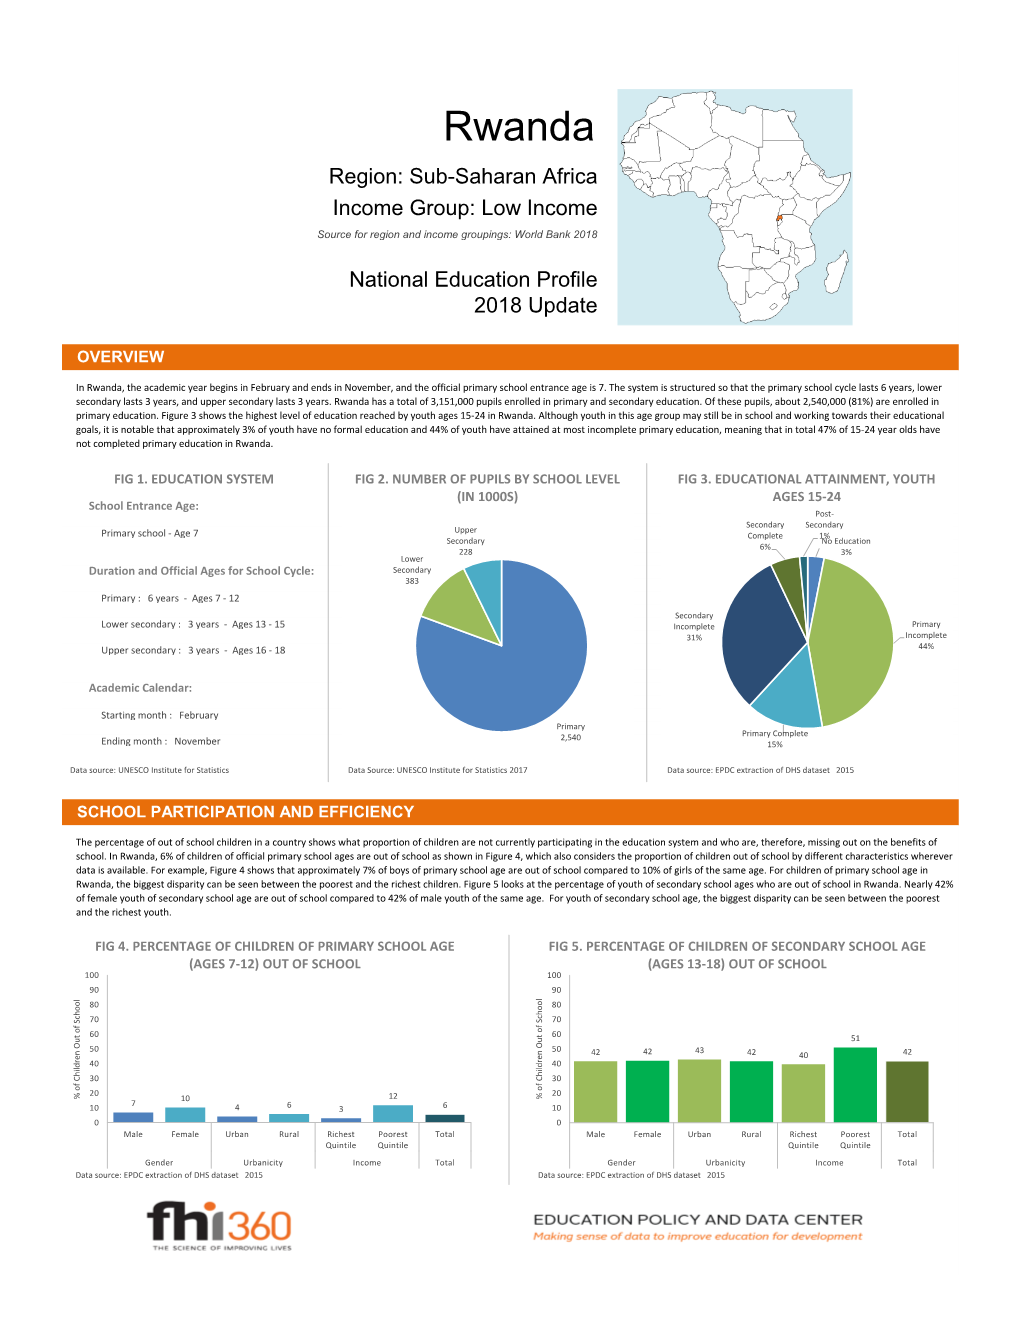 Rwanda Region: Sub-Saharan Africa Income Group: Low Income Source for Region and Income Groupings: World Bank 2018